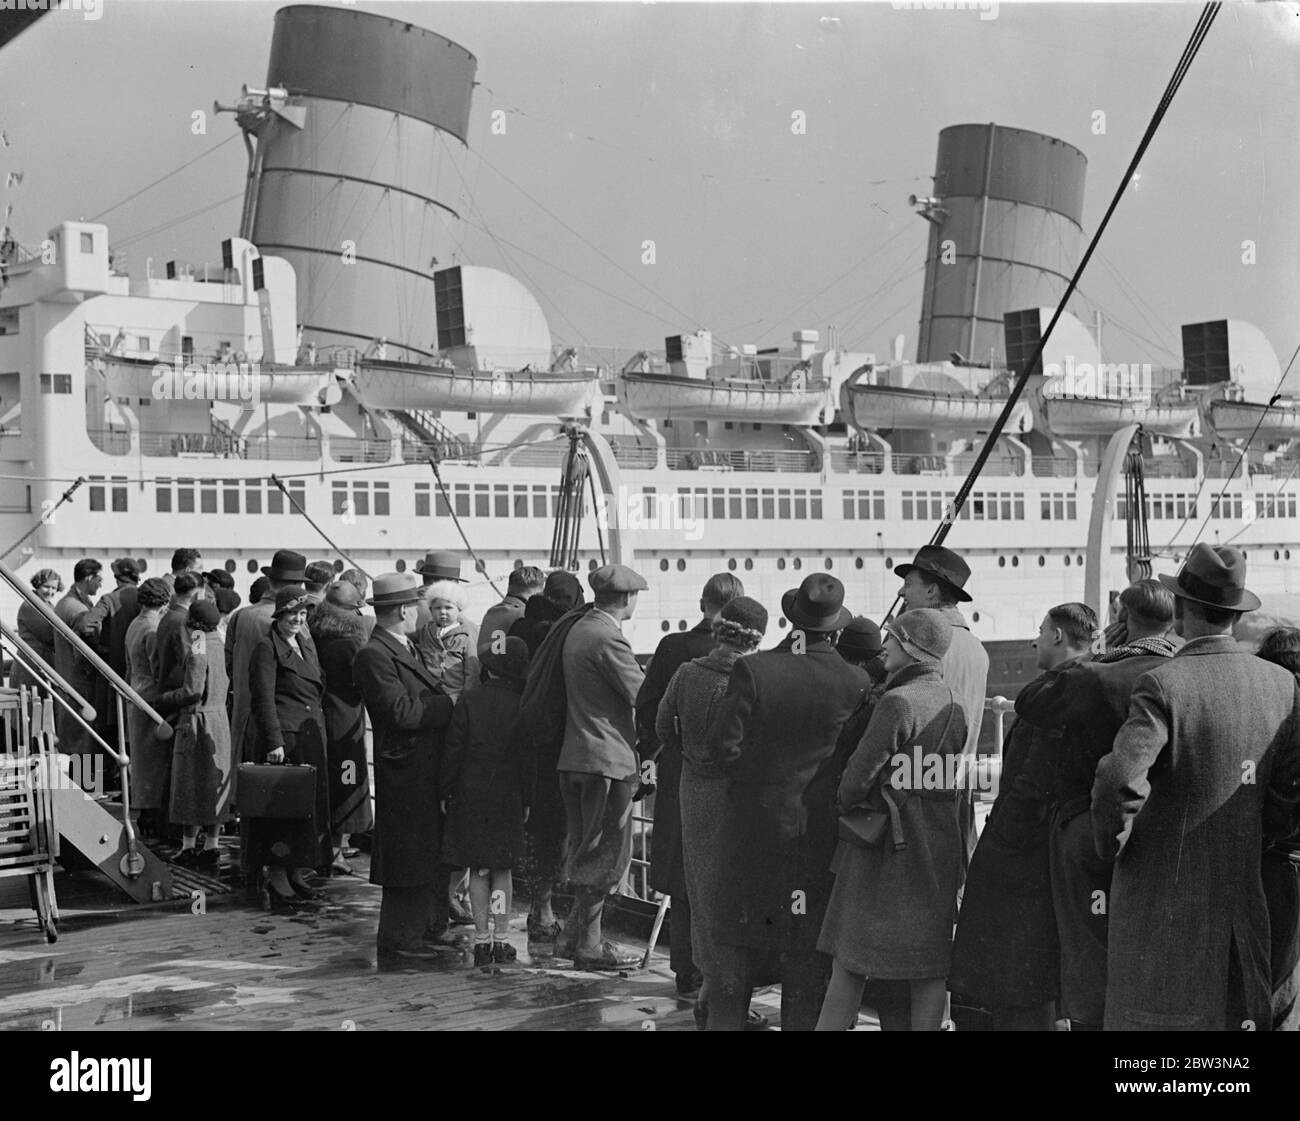 Queen Mary as Easter attraction . Thousands of Easter holidaymakers crowded pleasur steamers at Southampton in order to obtain a close up view of the ' Queen Mary ' as she lies in the Ocean Dock . Photo shows , viewing the ' Queen Mary ' from a pleaure steamer at Southampton . 13 April 1936 Stock Photo